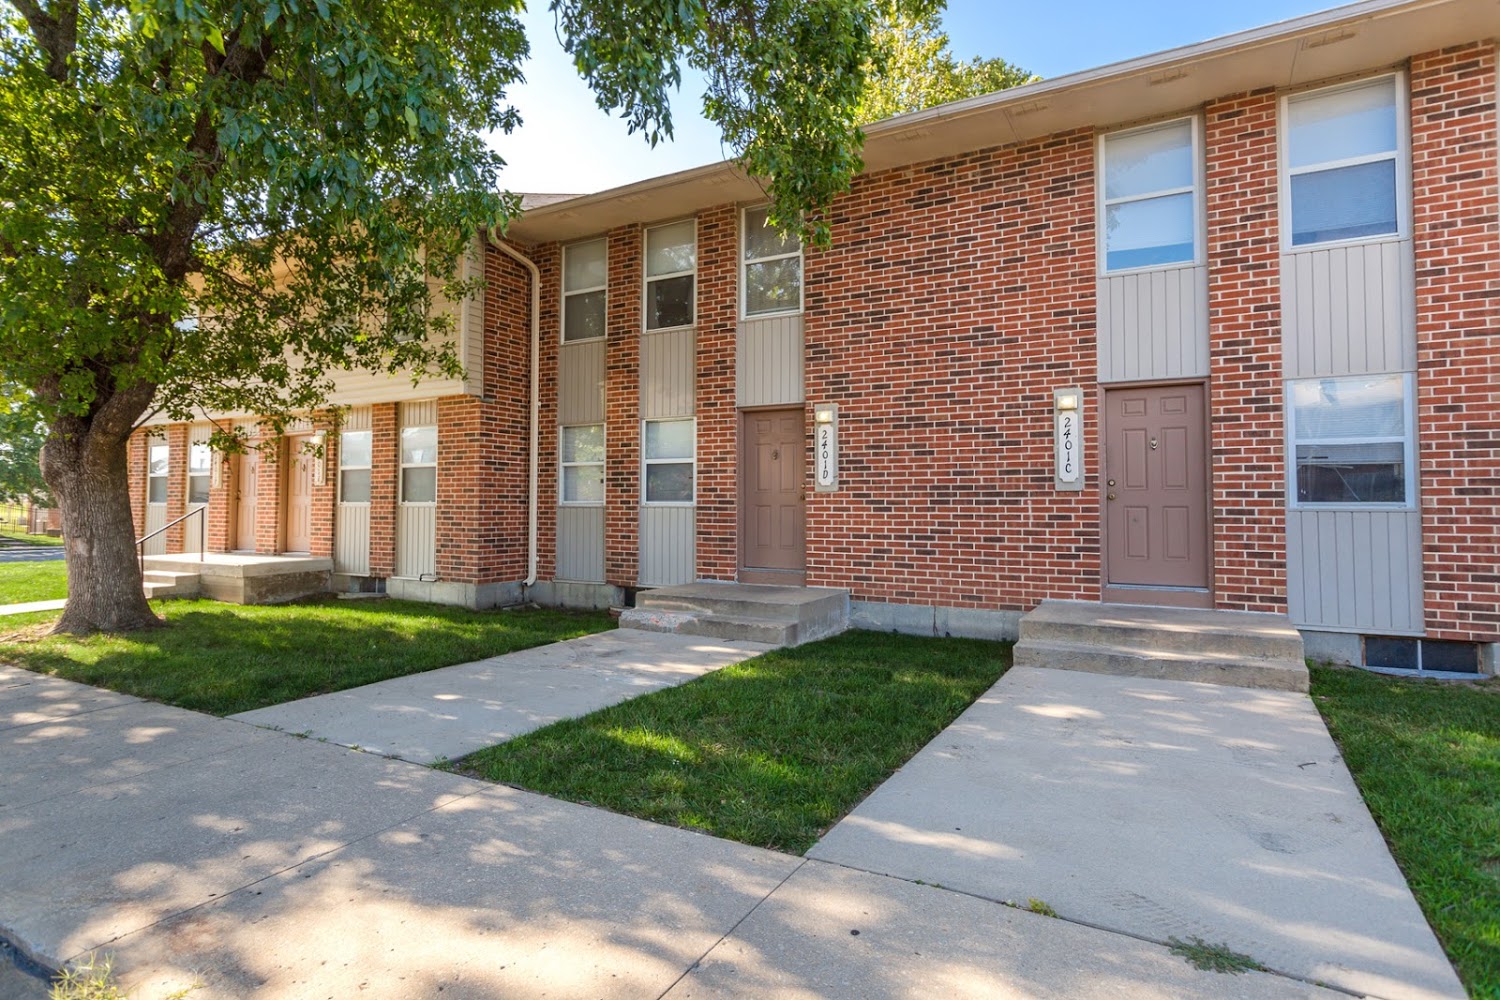 HIGHLAND PARK TOWNHOME APARTMENTS